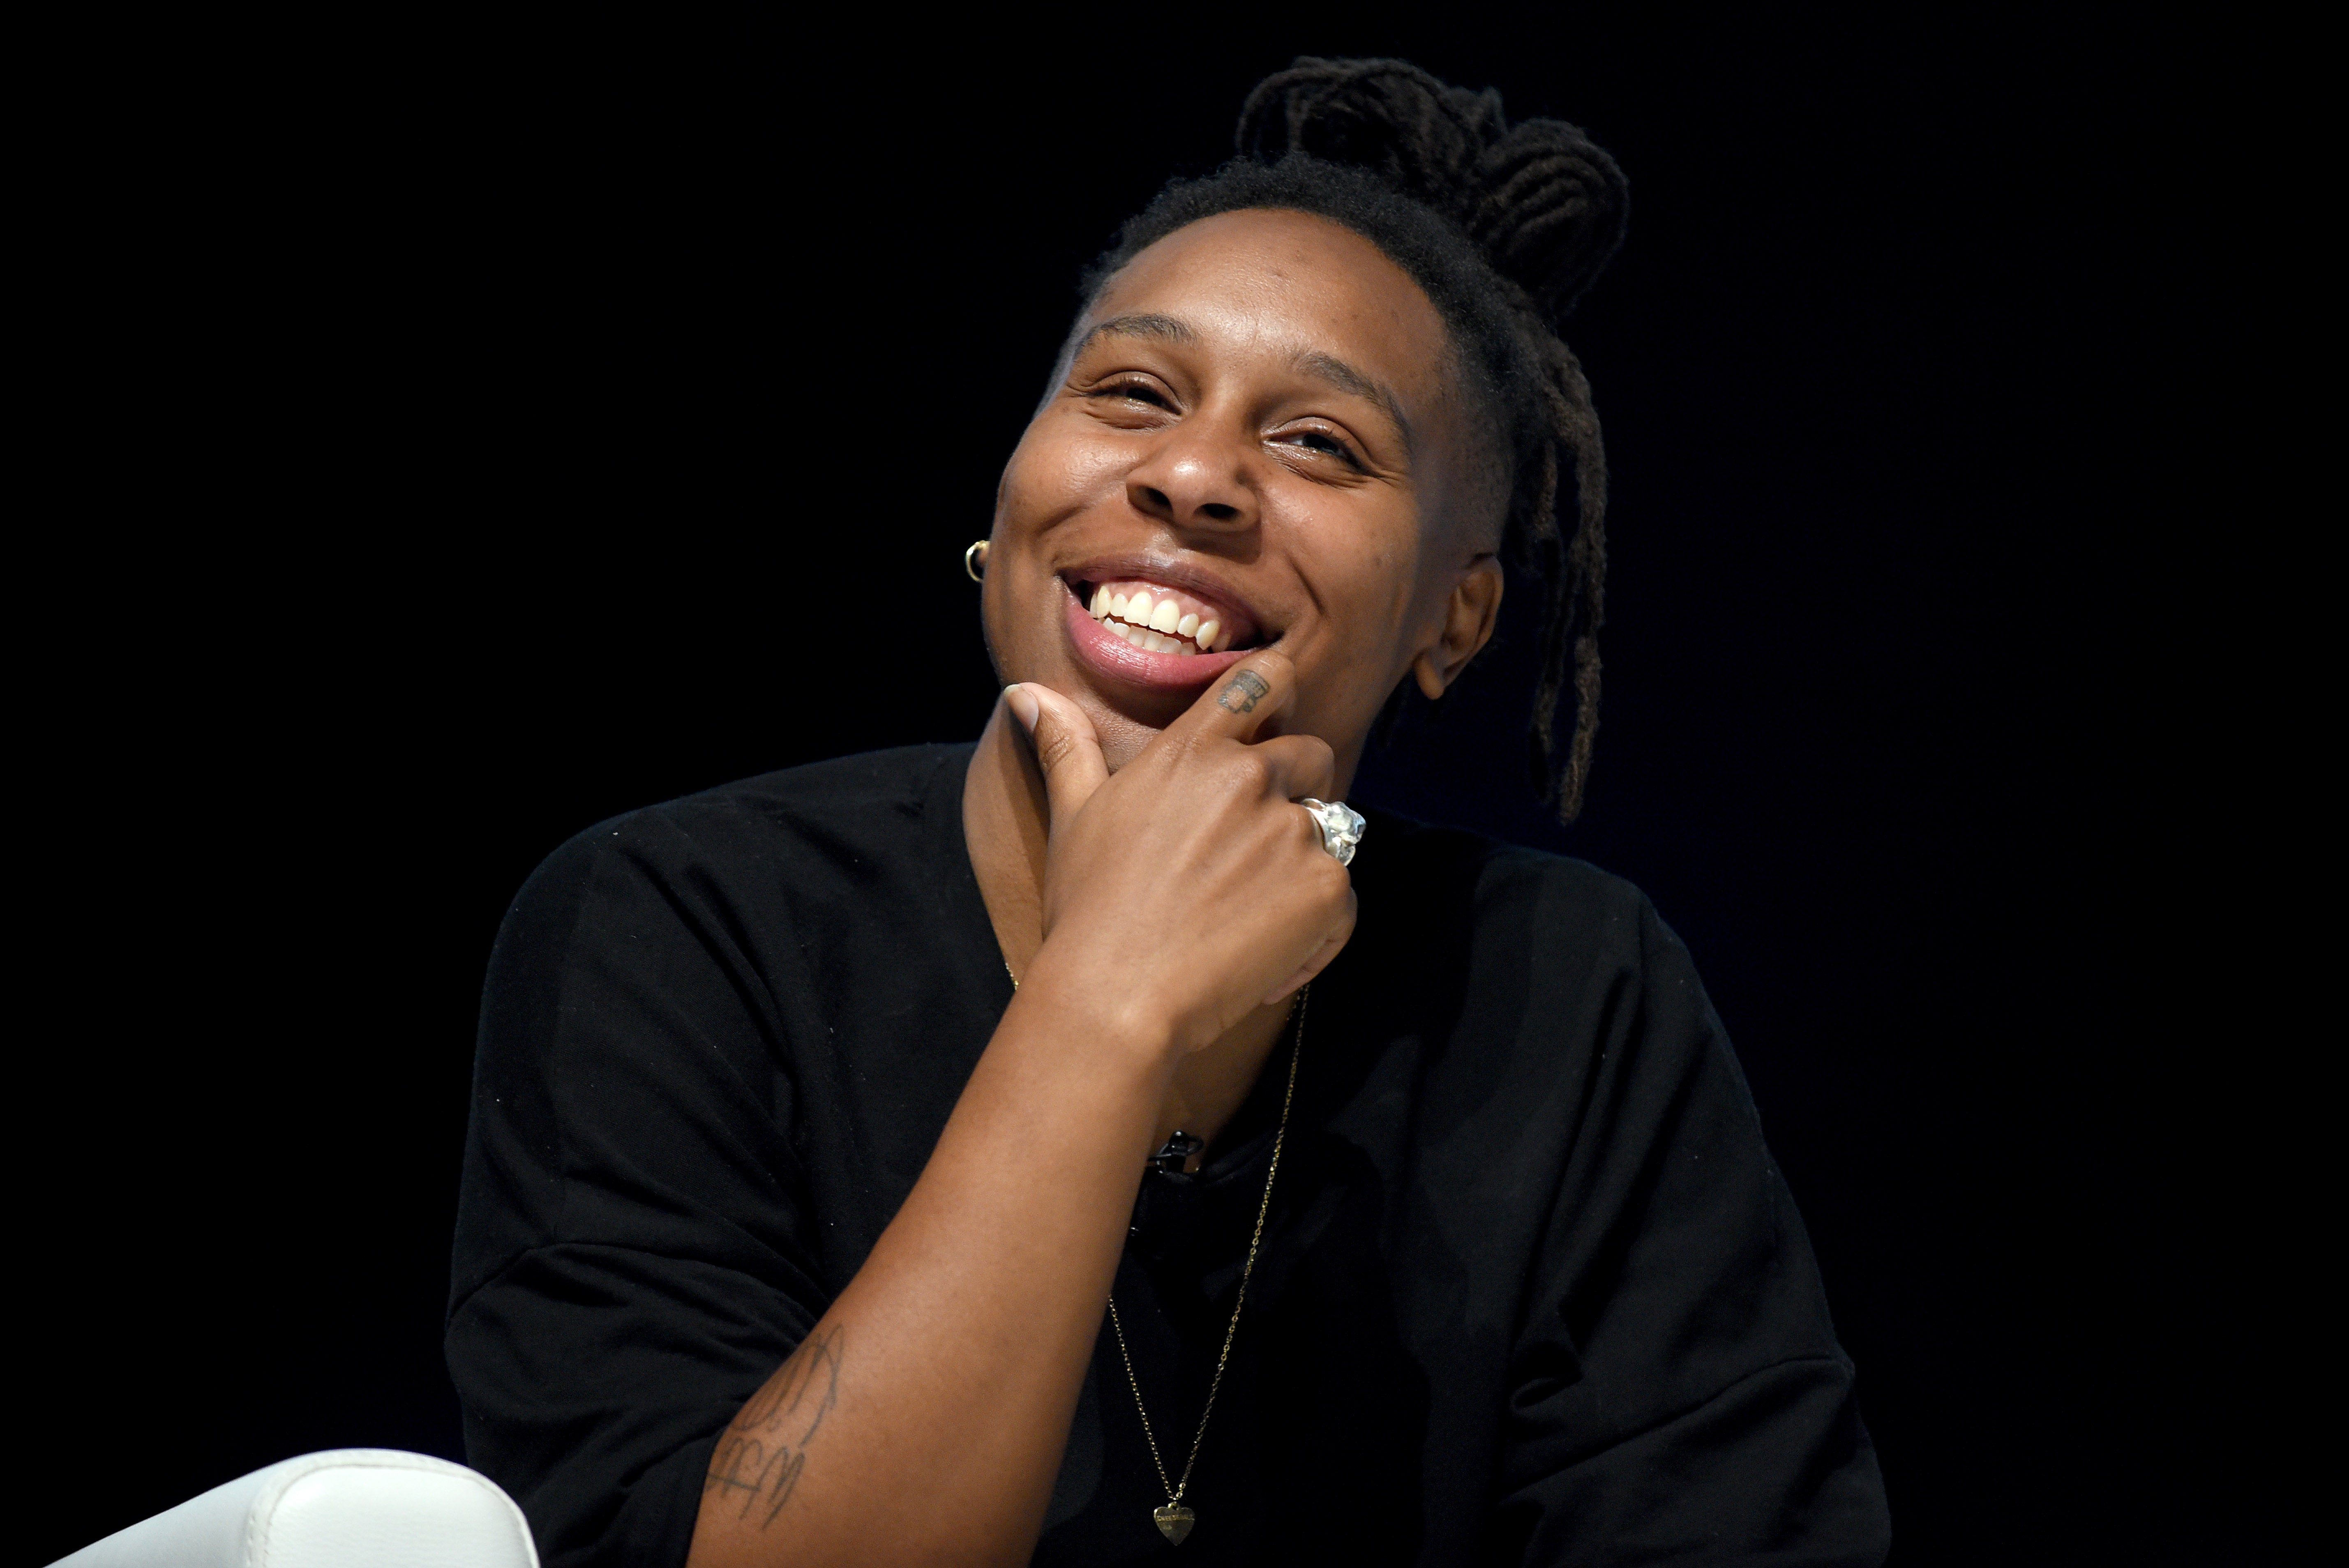 Lena Waithe Is The First Black Woman To Win An Emmy For Comedy Writing
